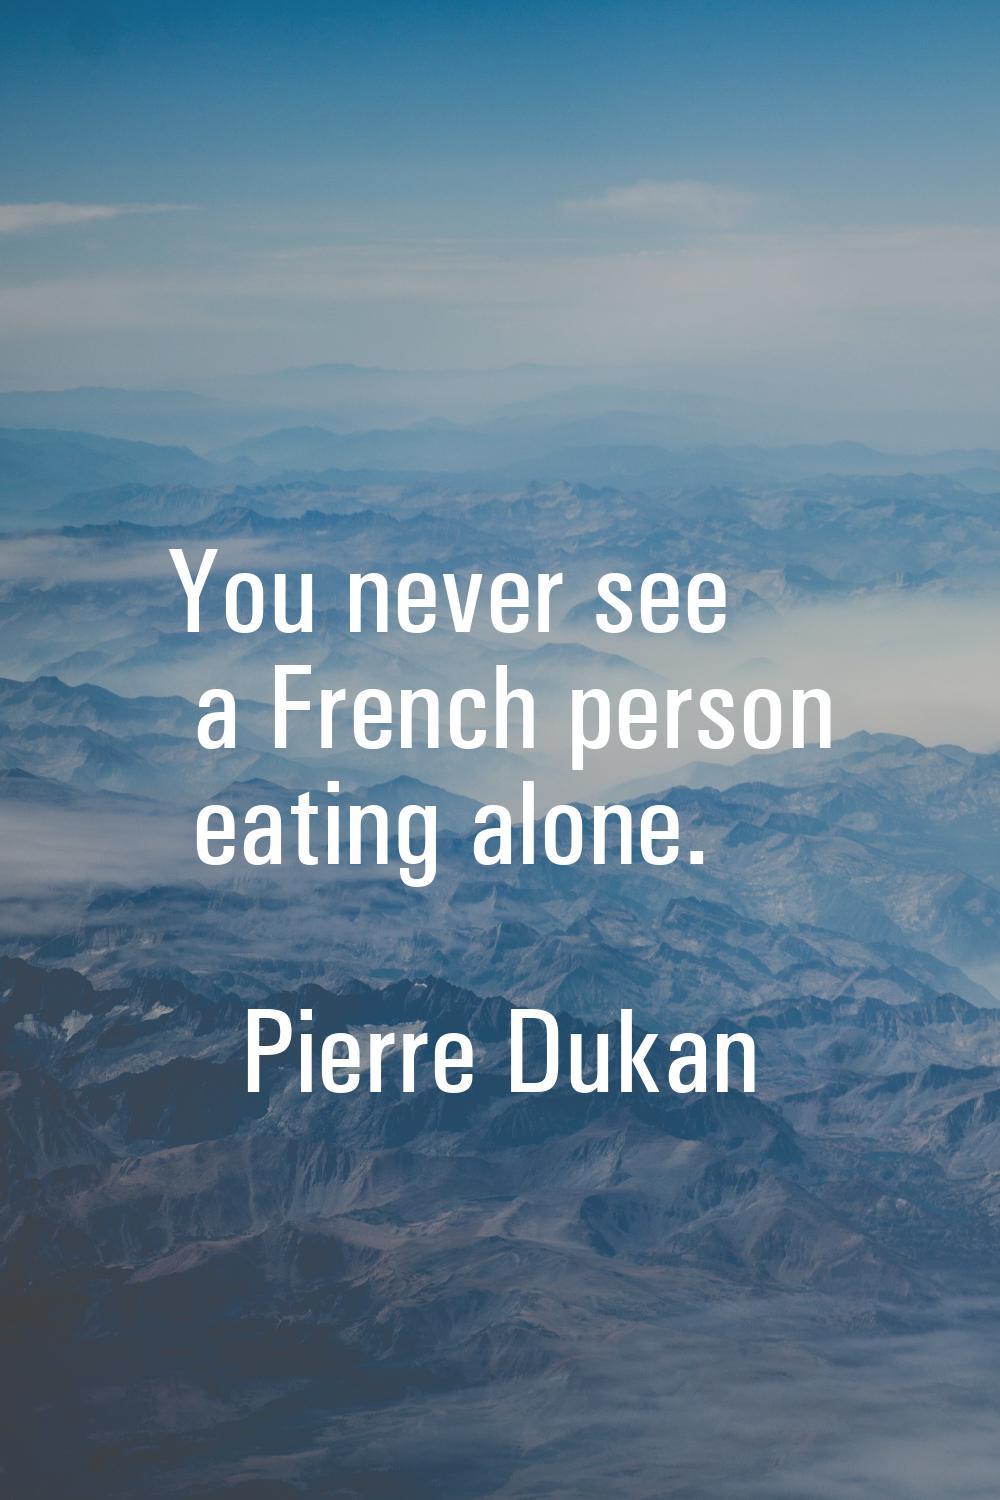 You never see a French person eating alone.